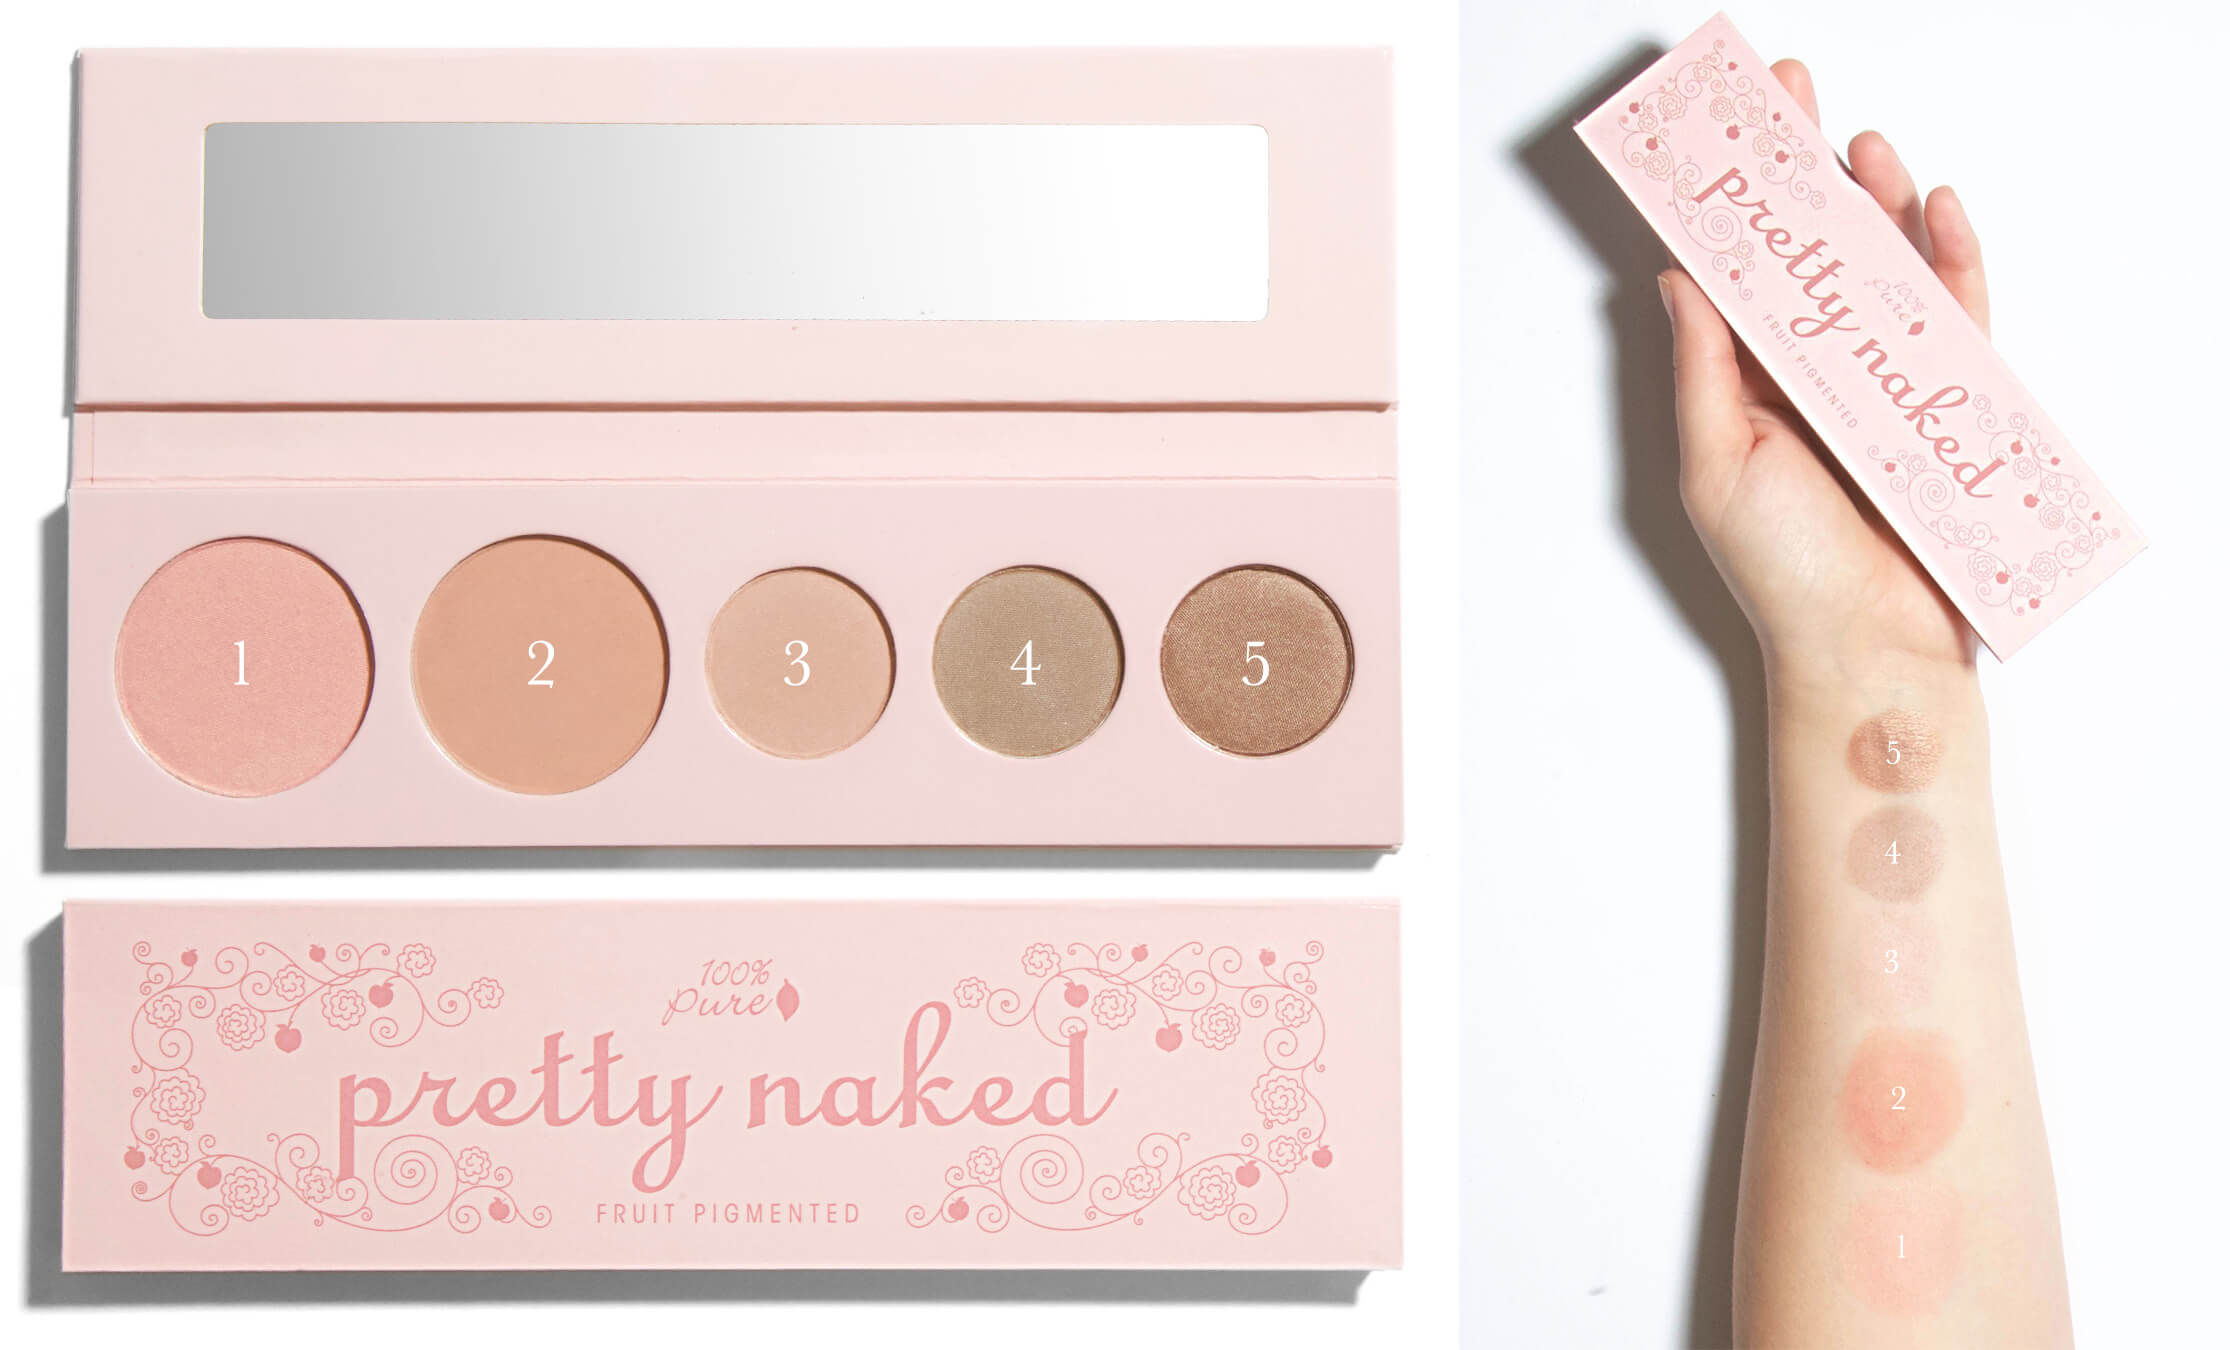 100% PURE Pretty Naked Palette Swatch